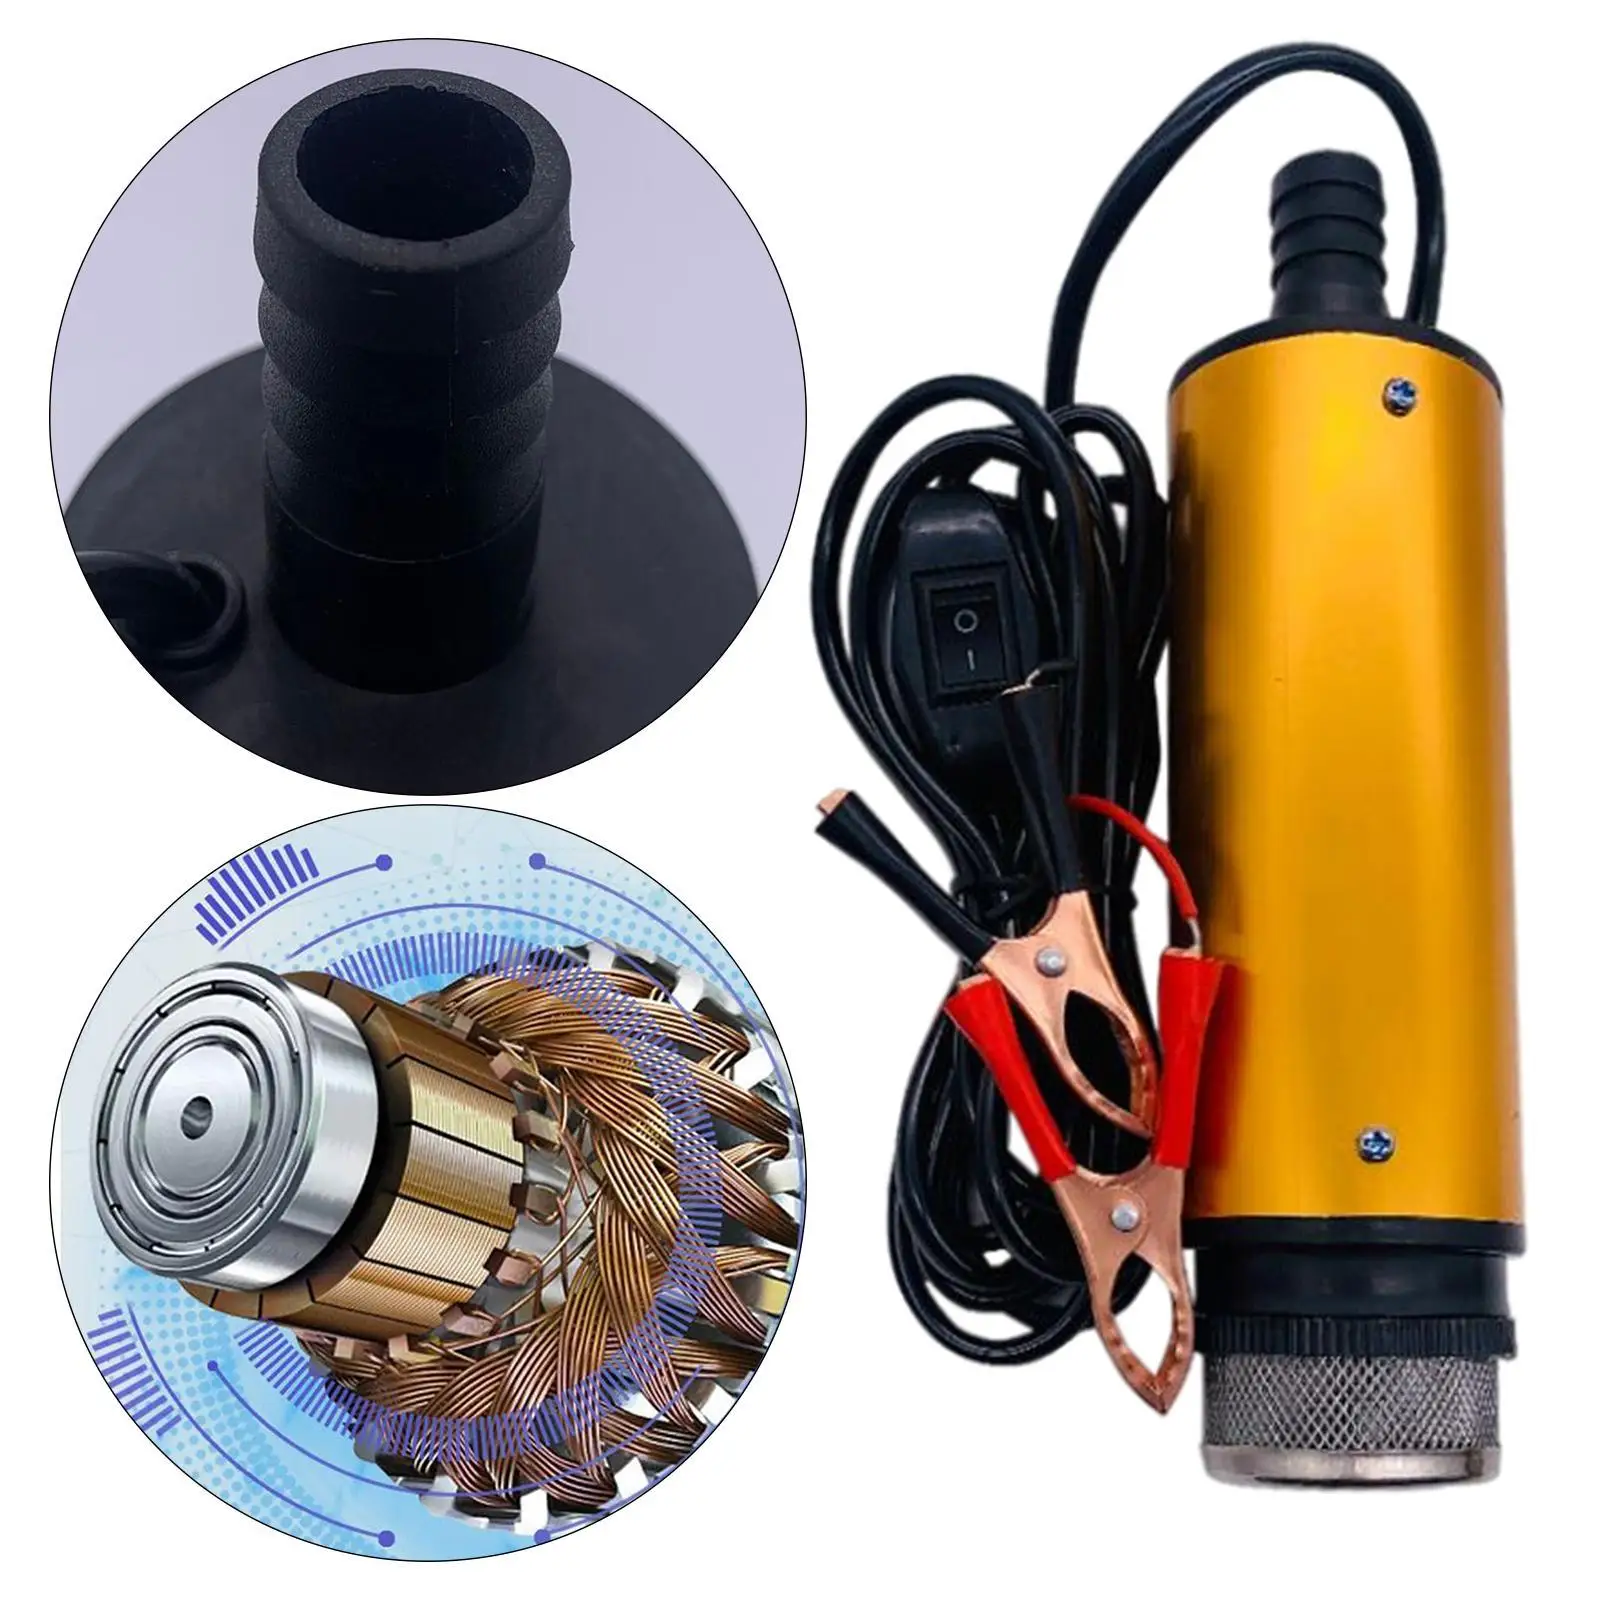 Water  Pump Aluminum Alloy Submersible Pump with Clip